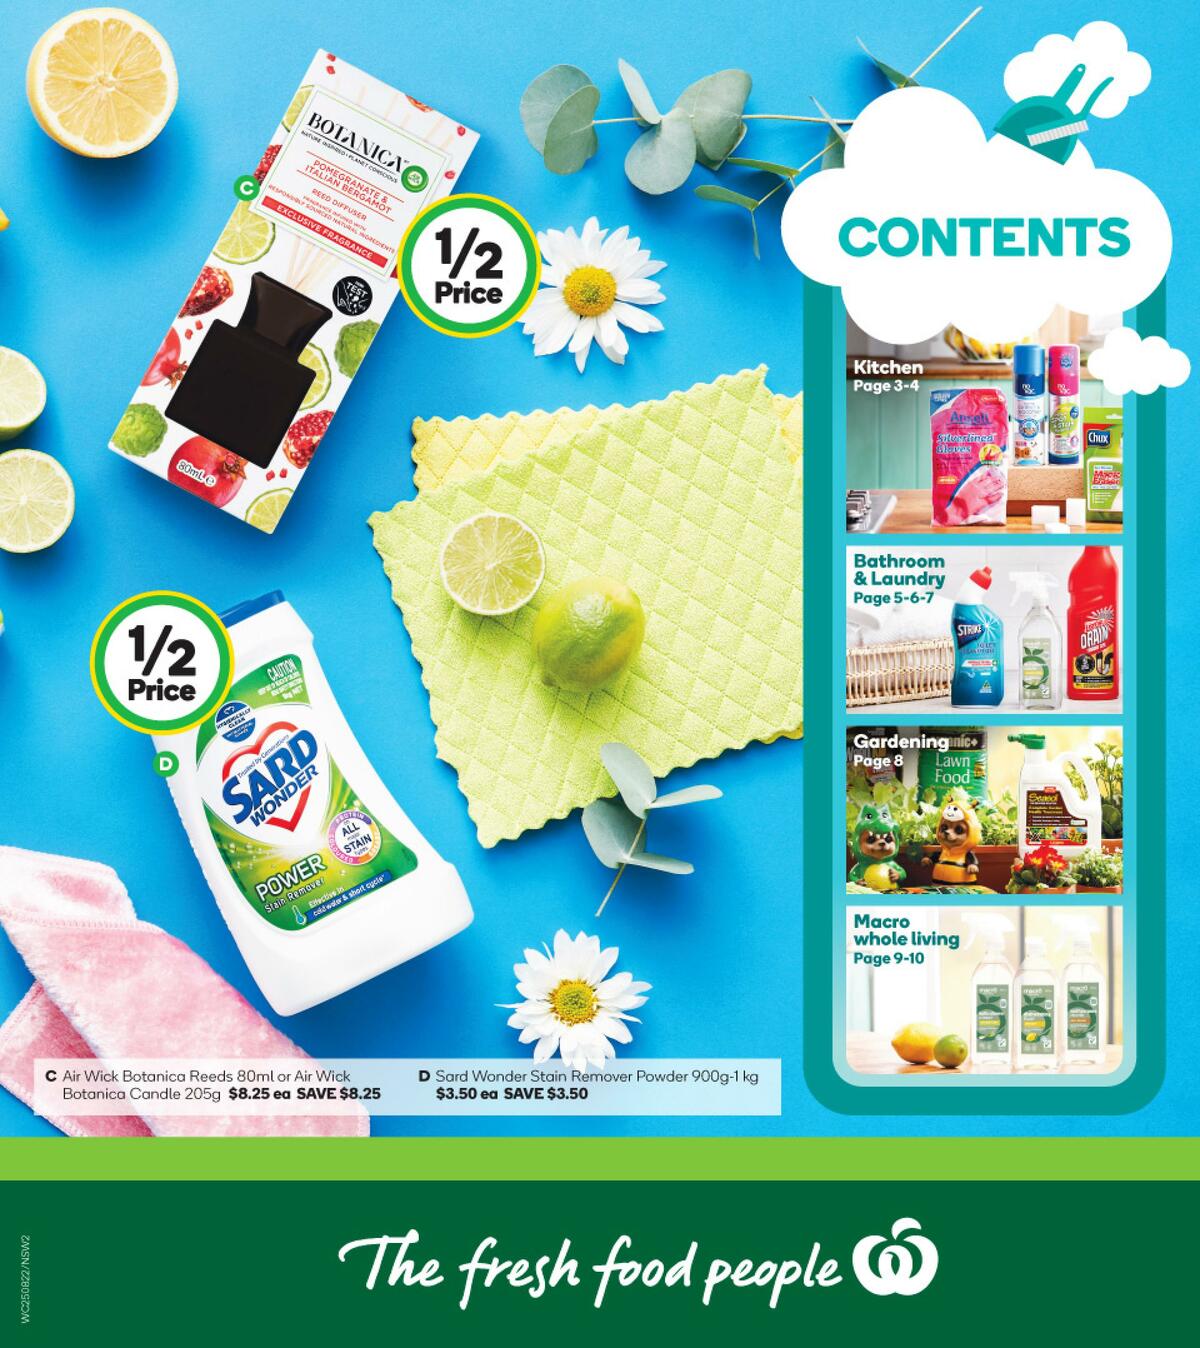 Woolworths Spring Entertaining Catalogues from 25 August